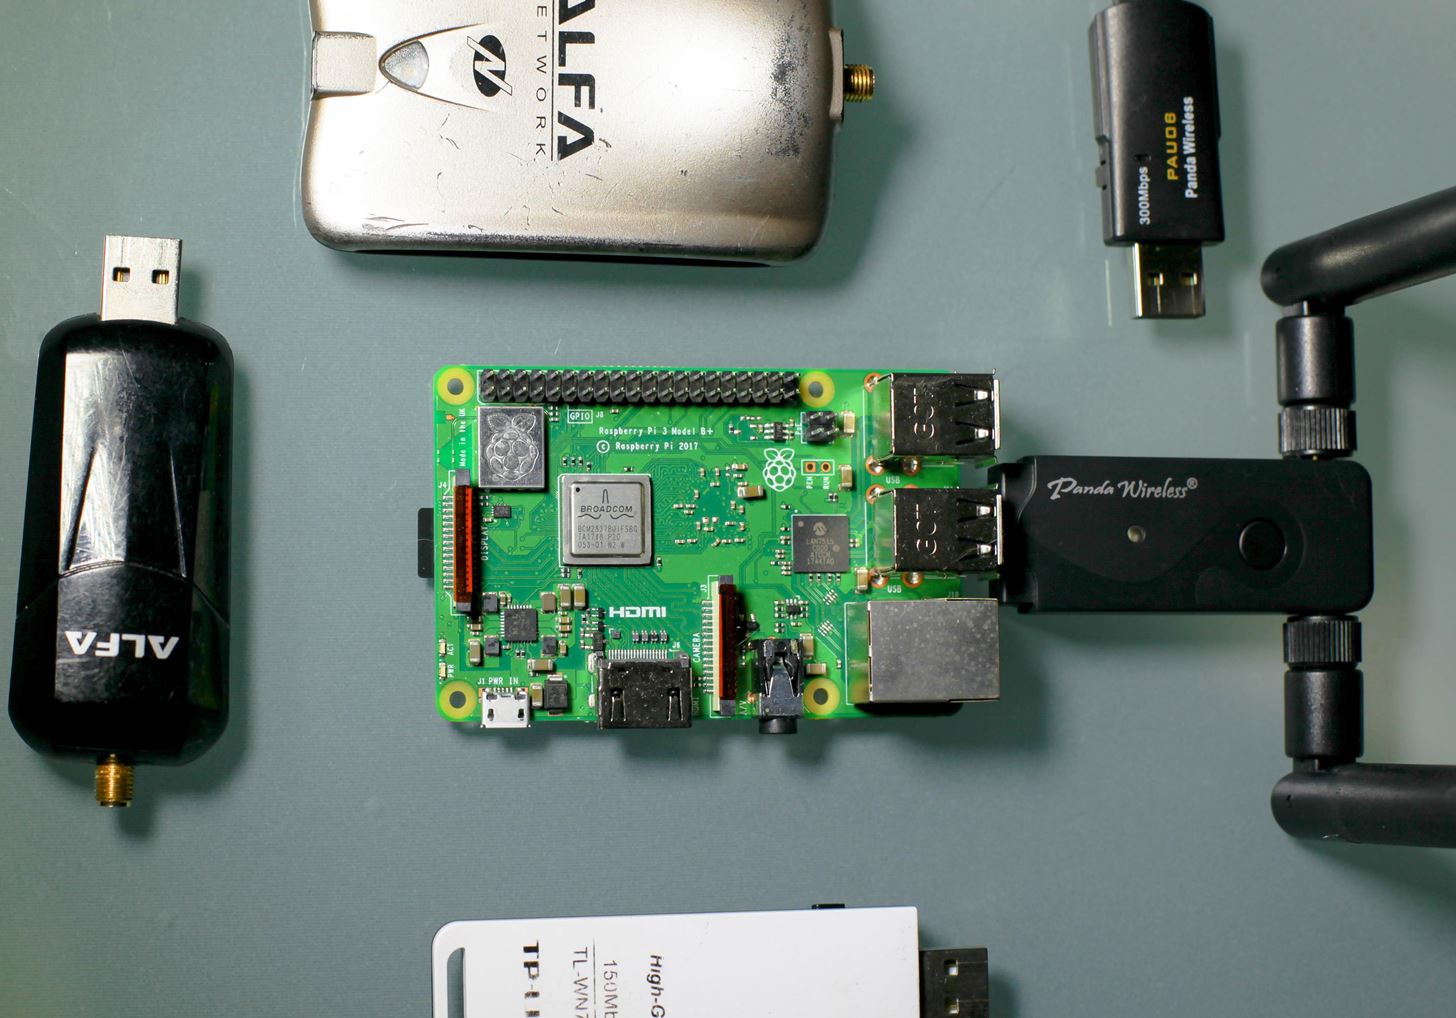 How To Build A Beginner Hacking Kit With The Raspberry Pi 3 Model